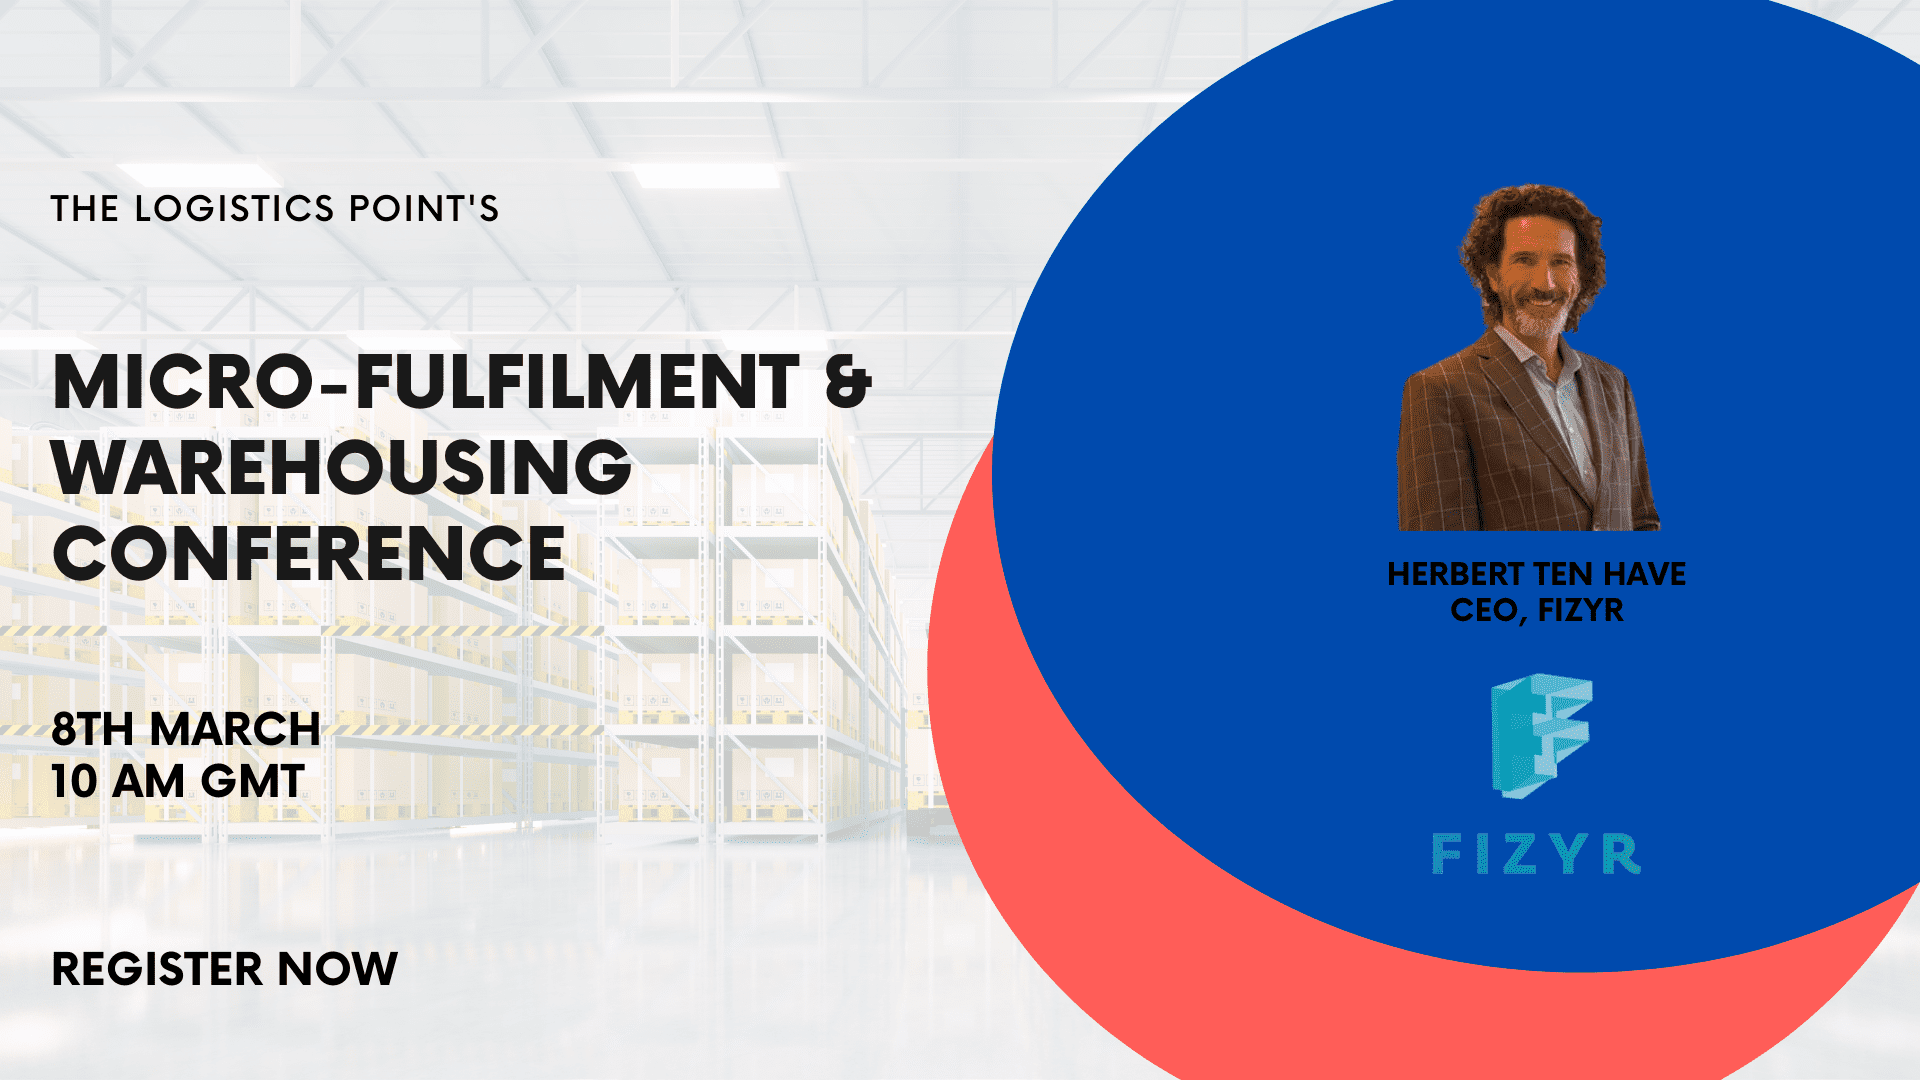 Join us in Micro-fulfillment and Warehousing event in March